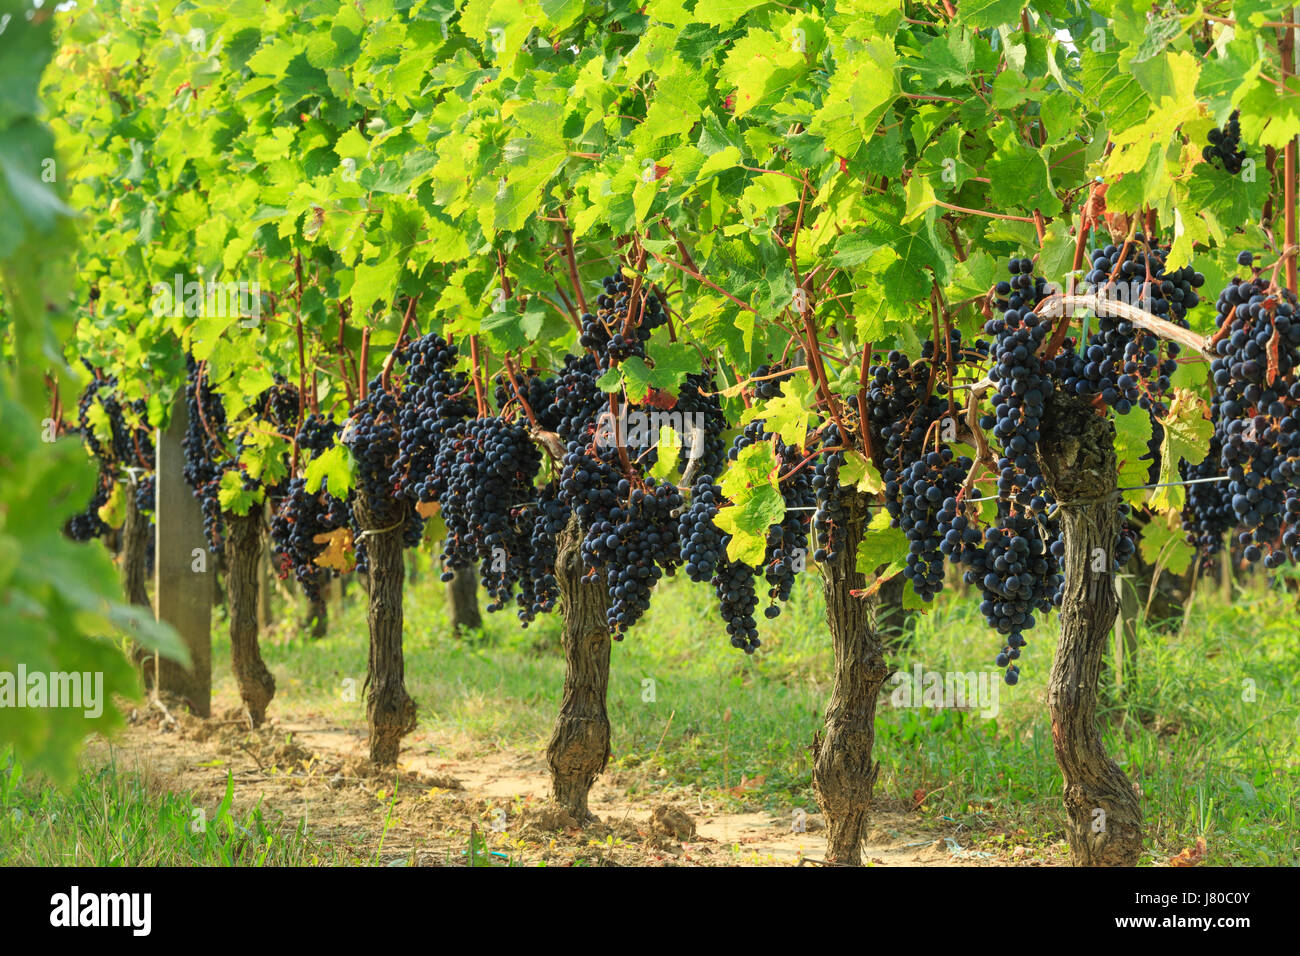 France, Gironde, Saint Emilion, listed as World Heritage by UNESCO, AOC Grand Cru vineyard ready to be harvested Stock Photo